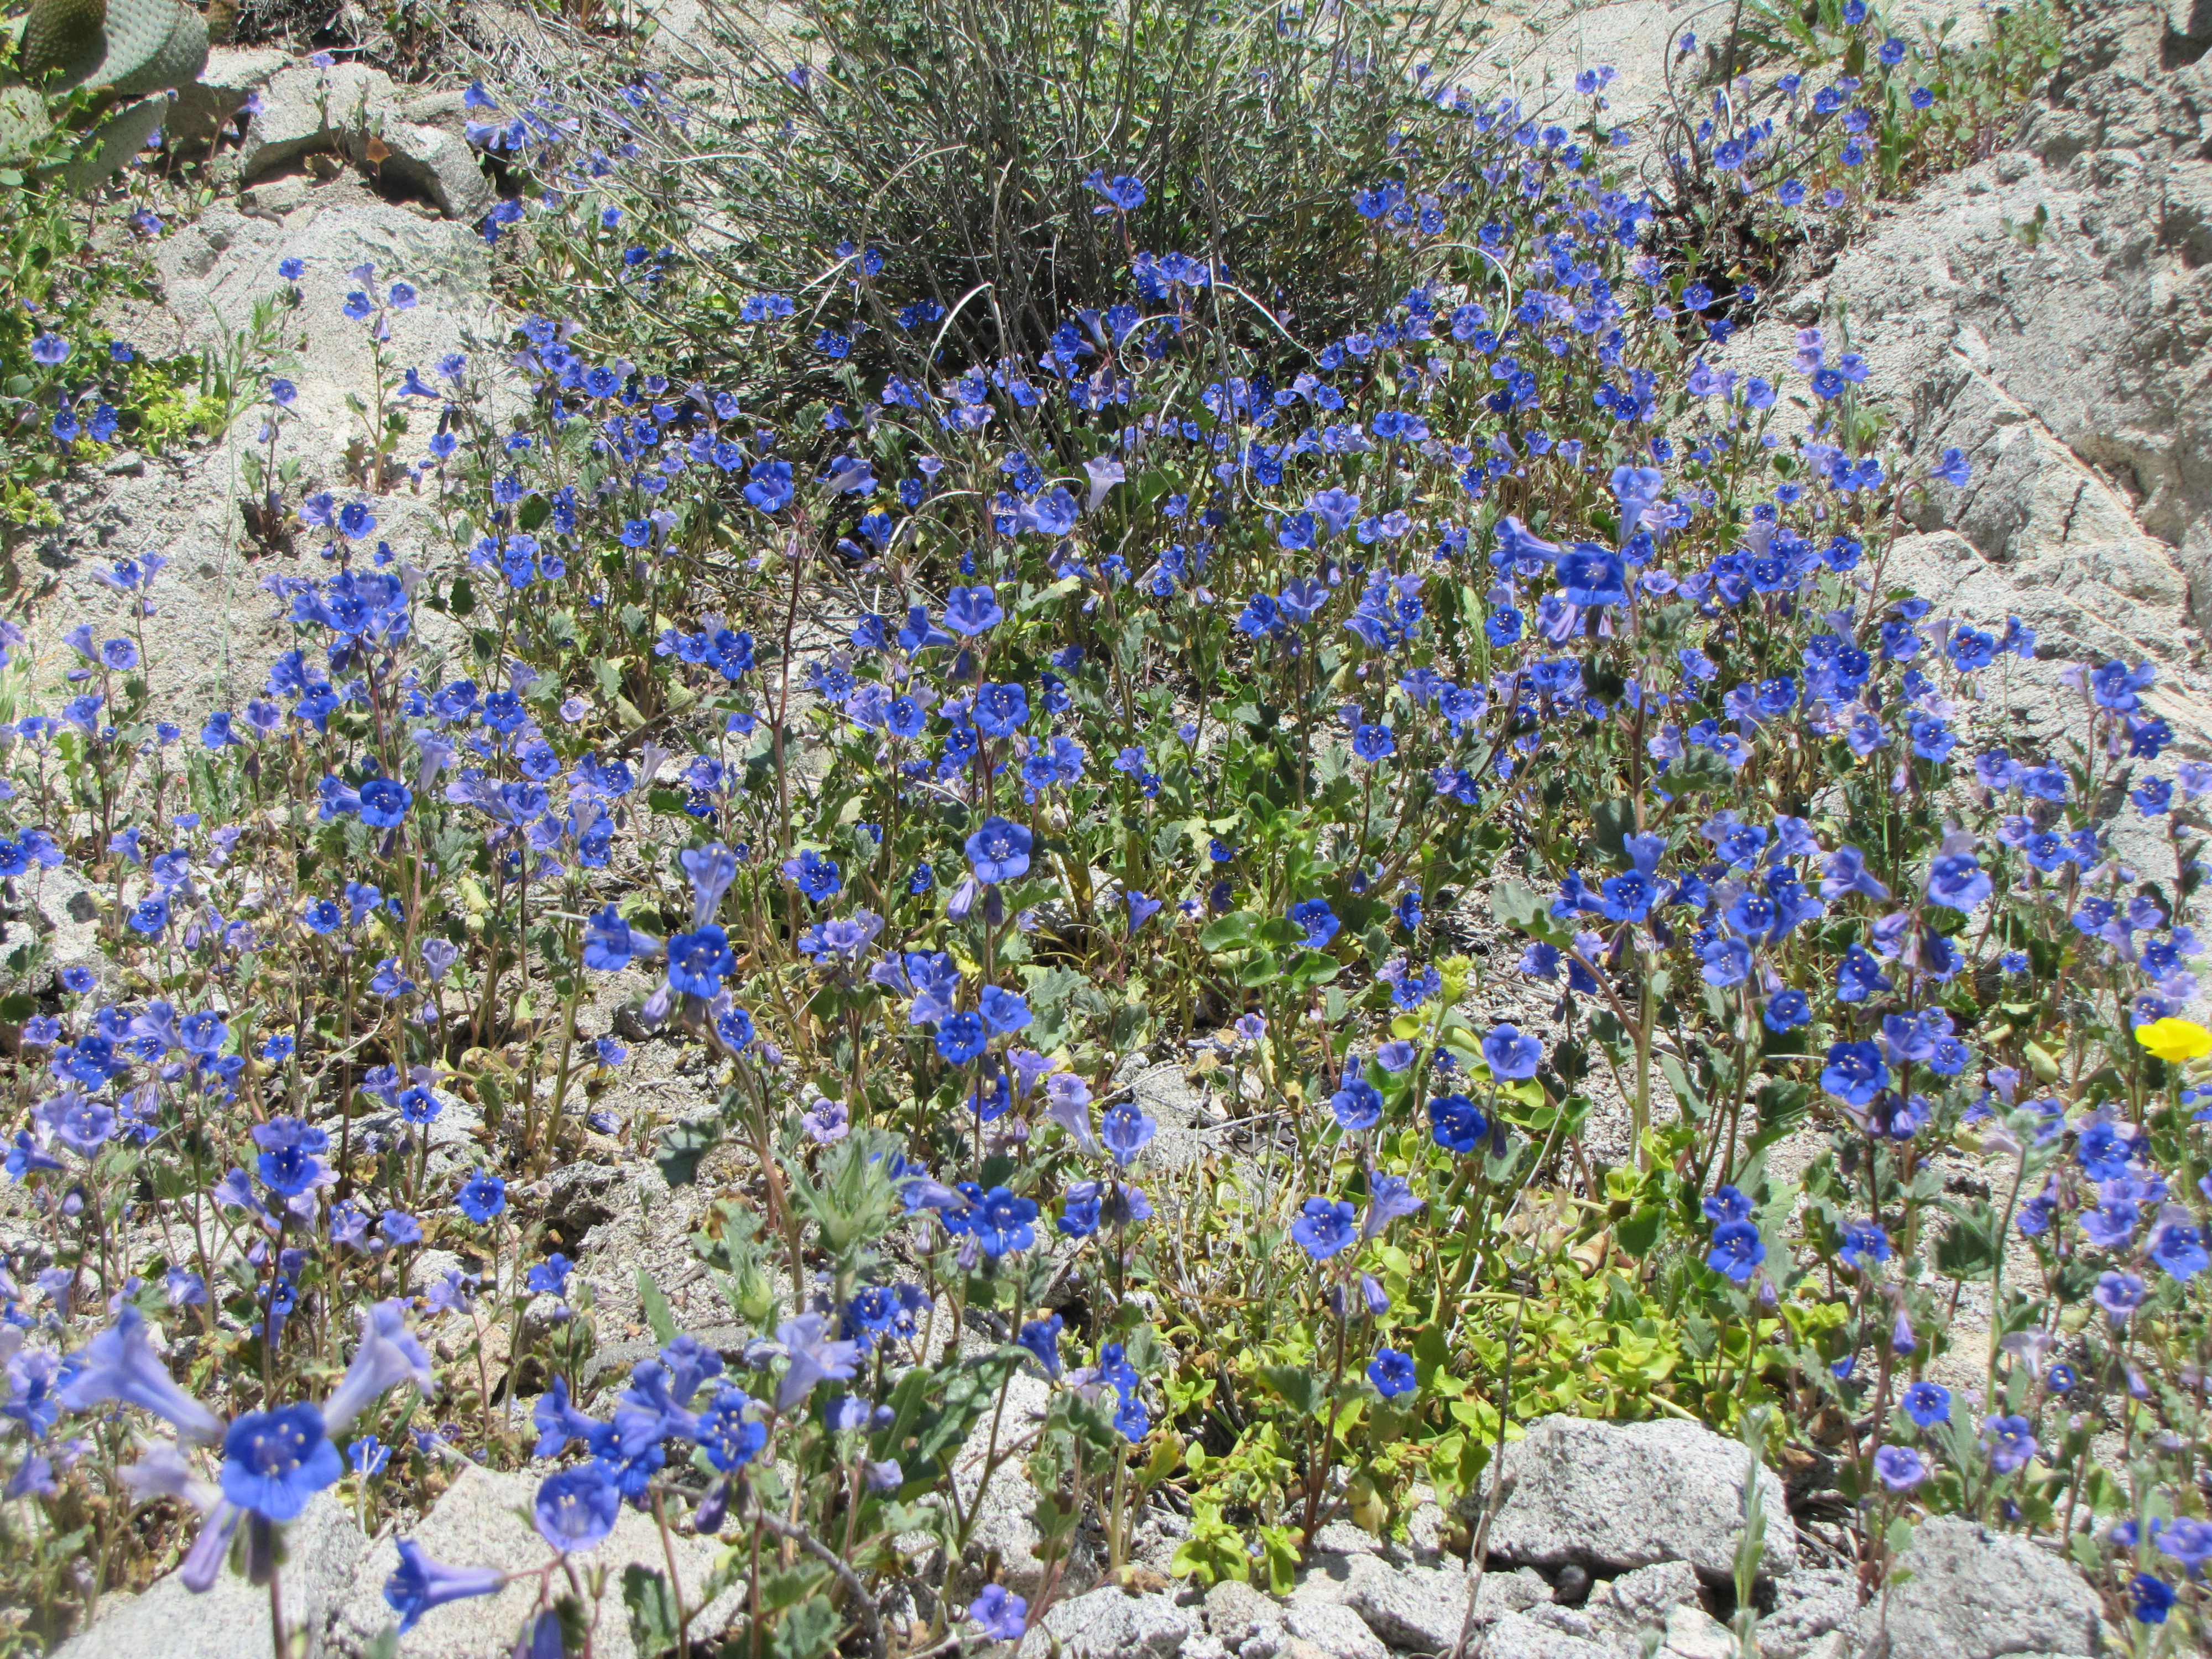 Violet-blue flowers interspersed with green. Photo: NPS / Neil Frakes